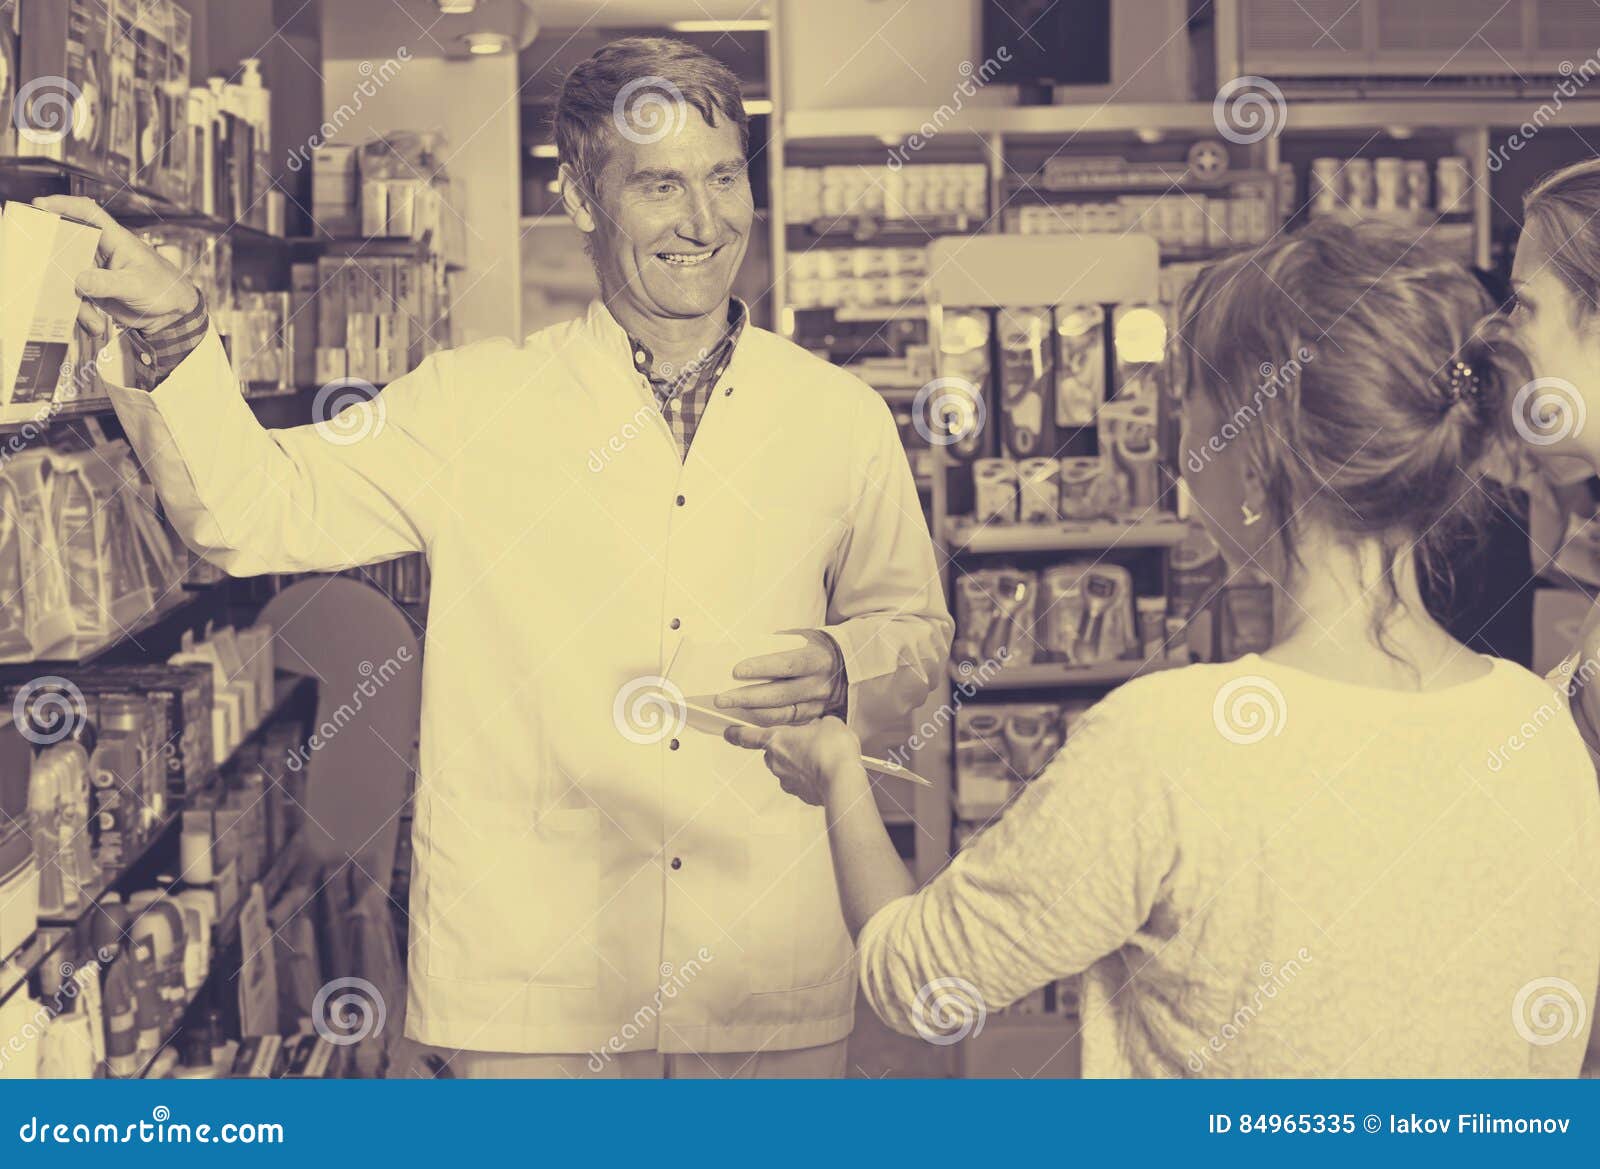 Man Pharmacist in Pharmaceutical Shop Stock Image - Image of cheerful ...